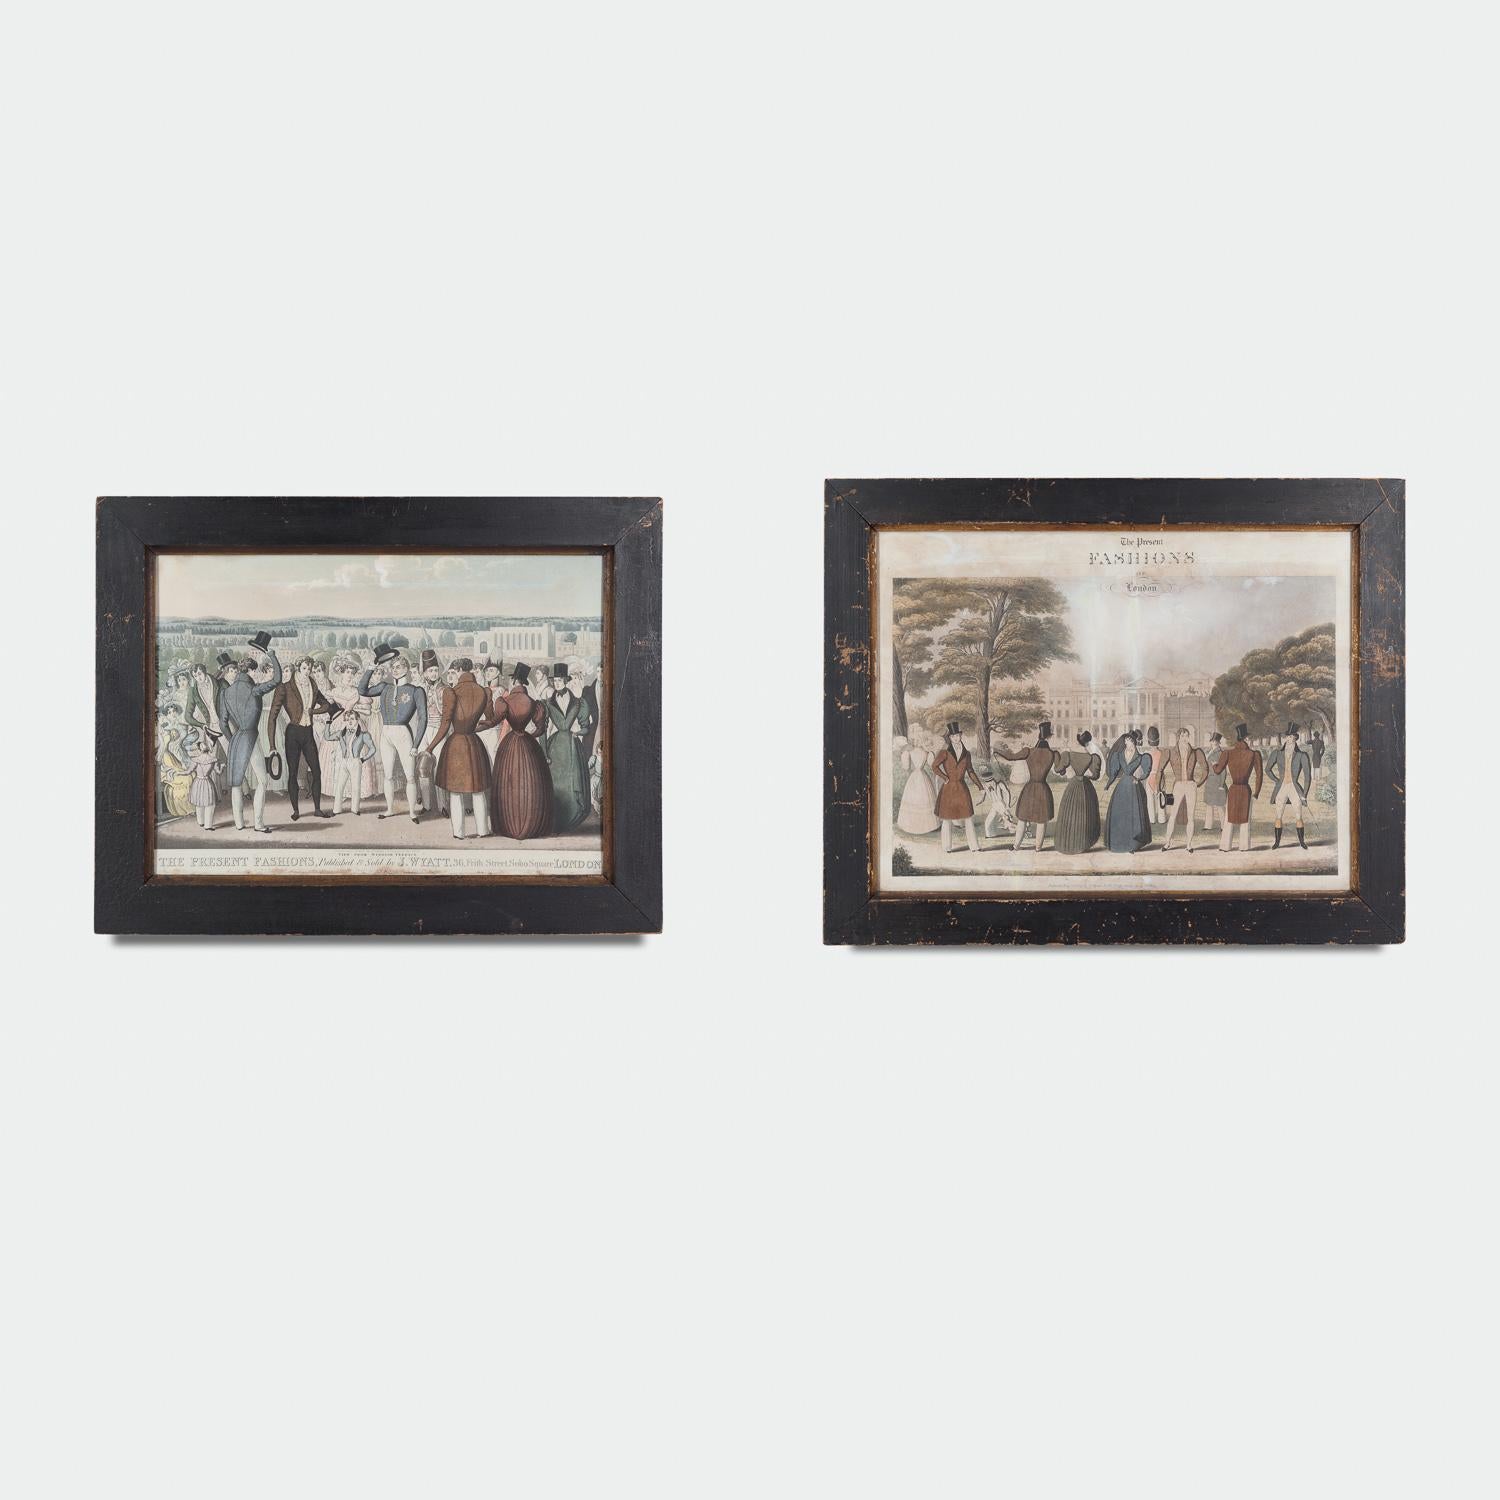 A pair of hand coloured aquatints, ‘The present fashion of London’ by and after J. Findlay, published and sold by J. Wyatt, 36 Frith Street, Soho Square, London. Circa 1829.

The frames measure height 47cm x width 60cm and height 49.5cm x width 62cm.